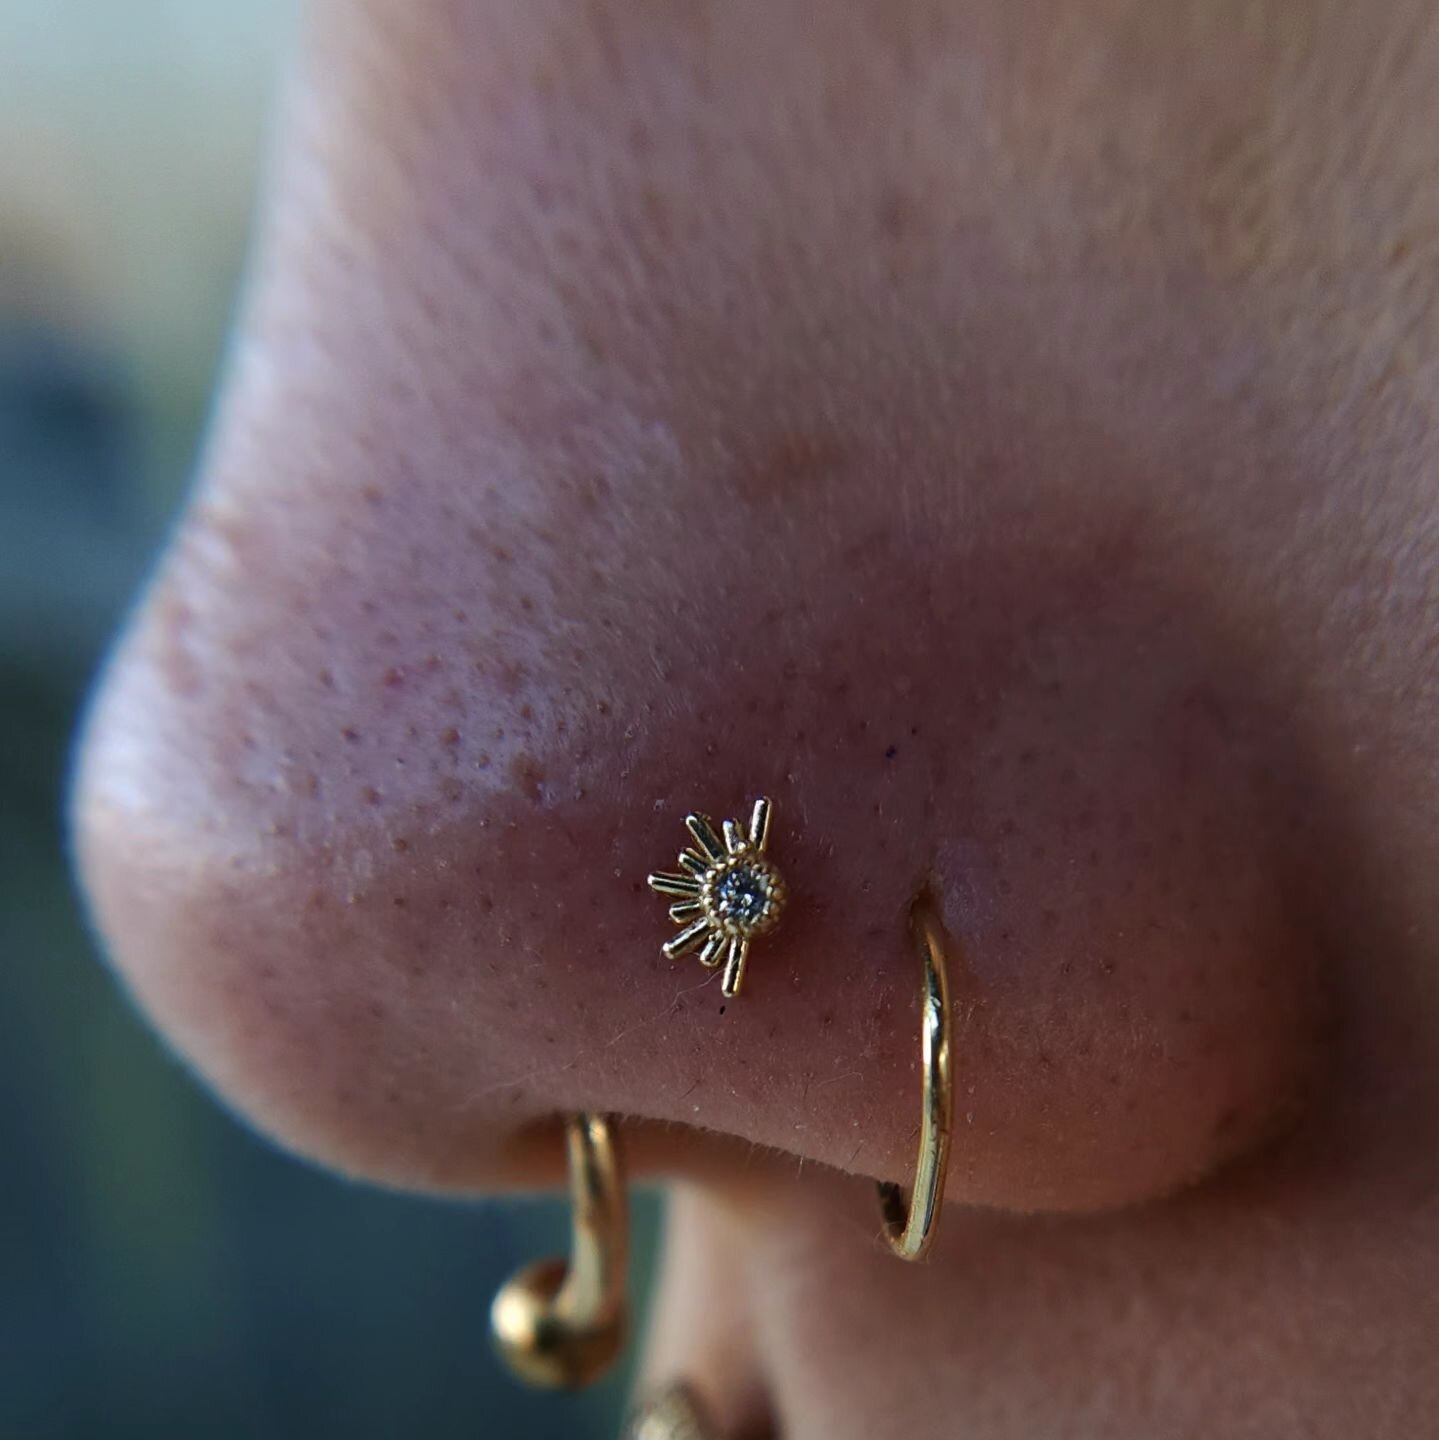 I'm still thinking about how cute this nose piercing came out! 🥹 The new Divinity jewelry we have is just stunning!

✨ Bridge &amp; I would love to work on more nose projects. There's been so much inspo out there, I hope more people get into it. 👃?